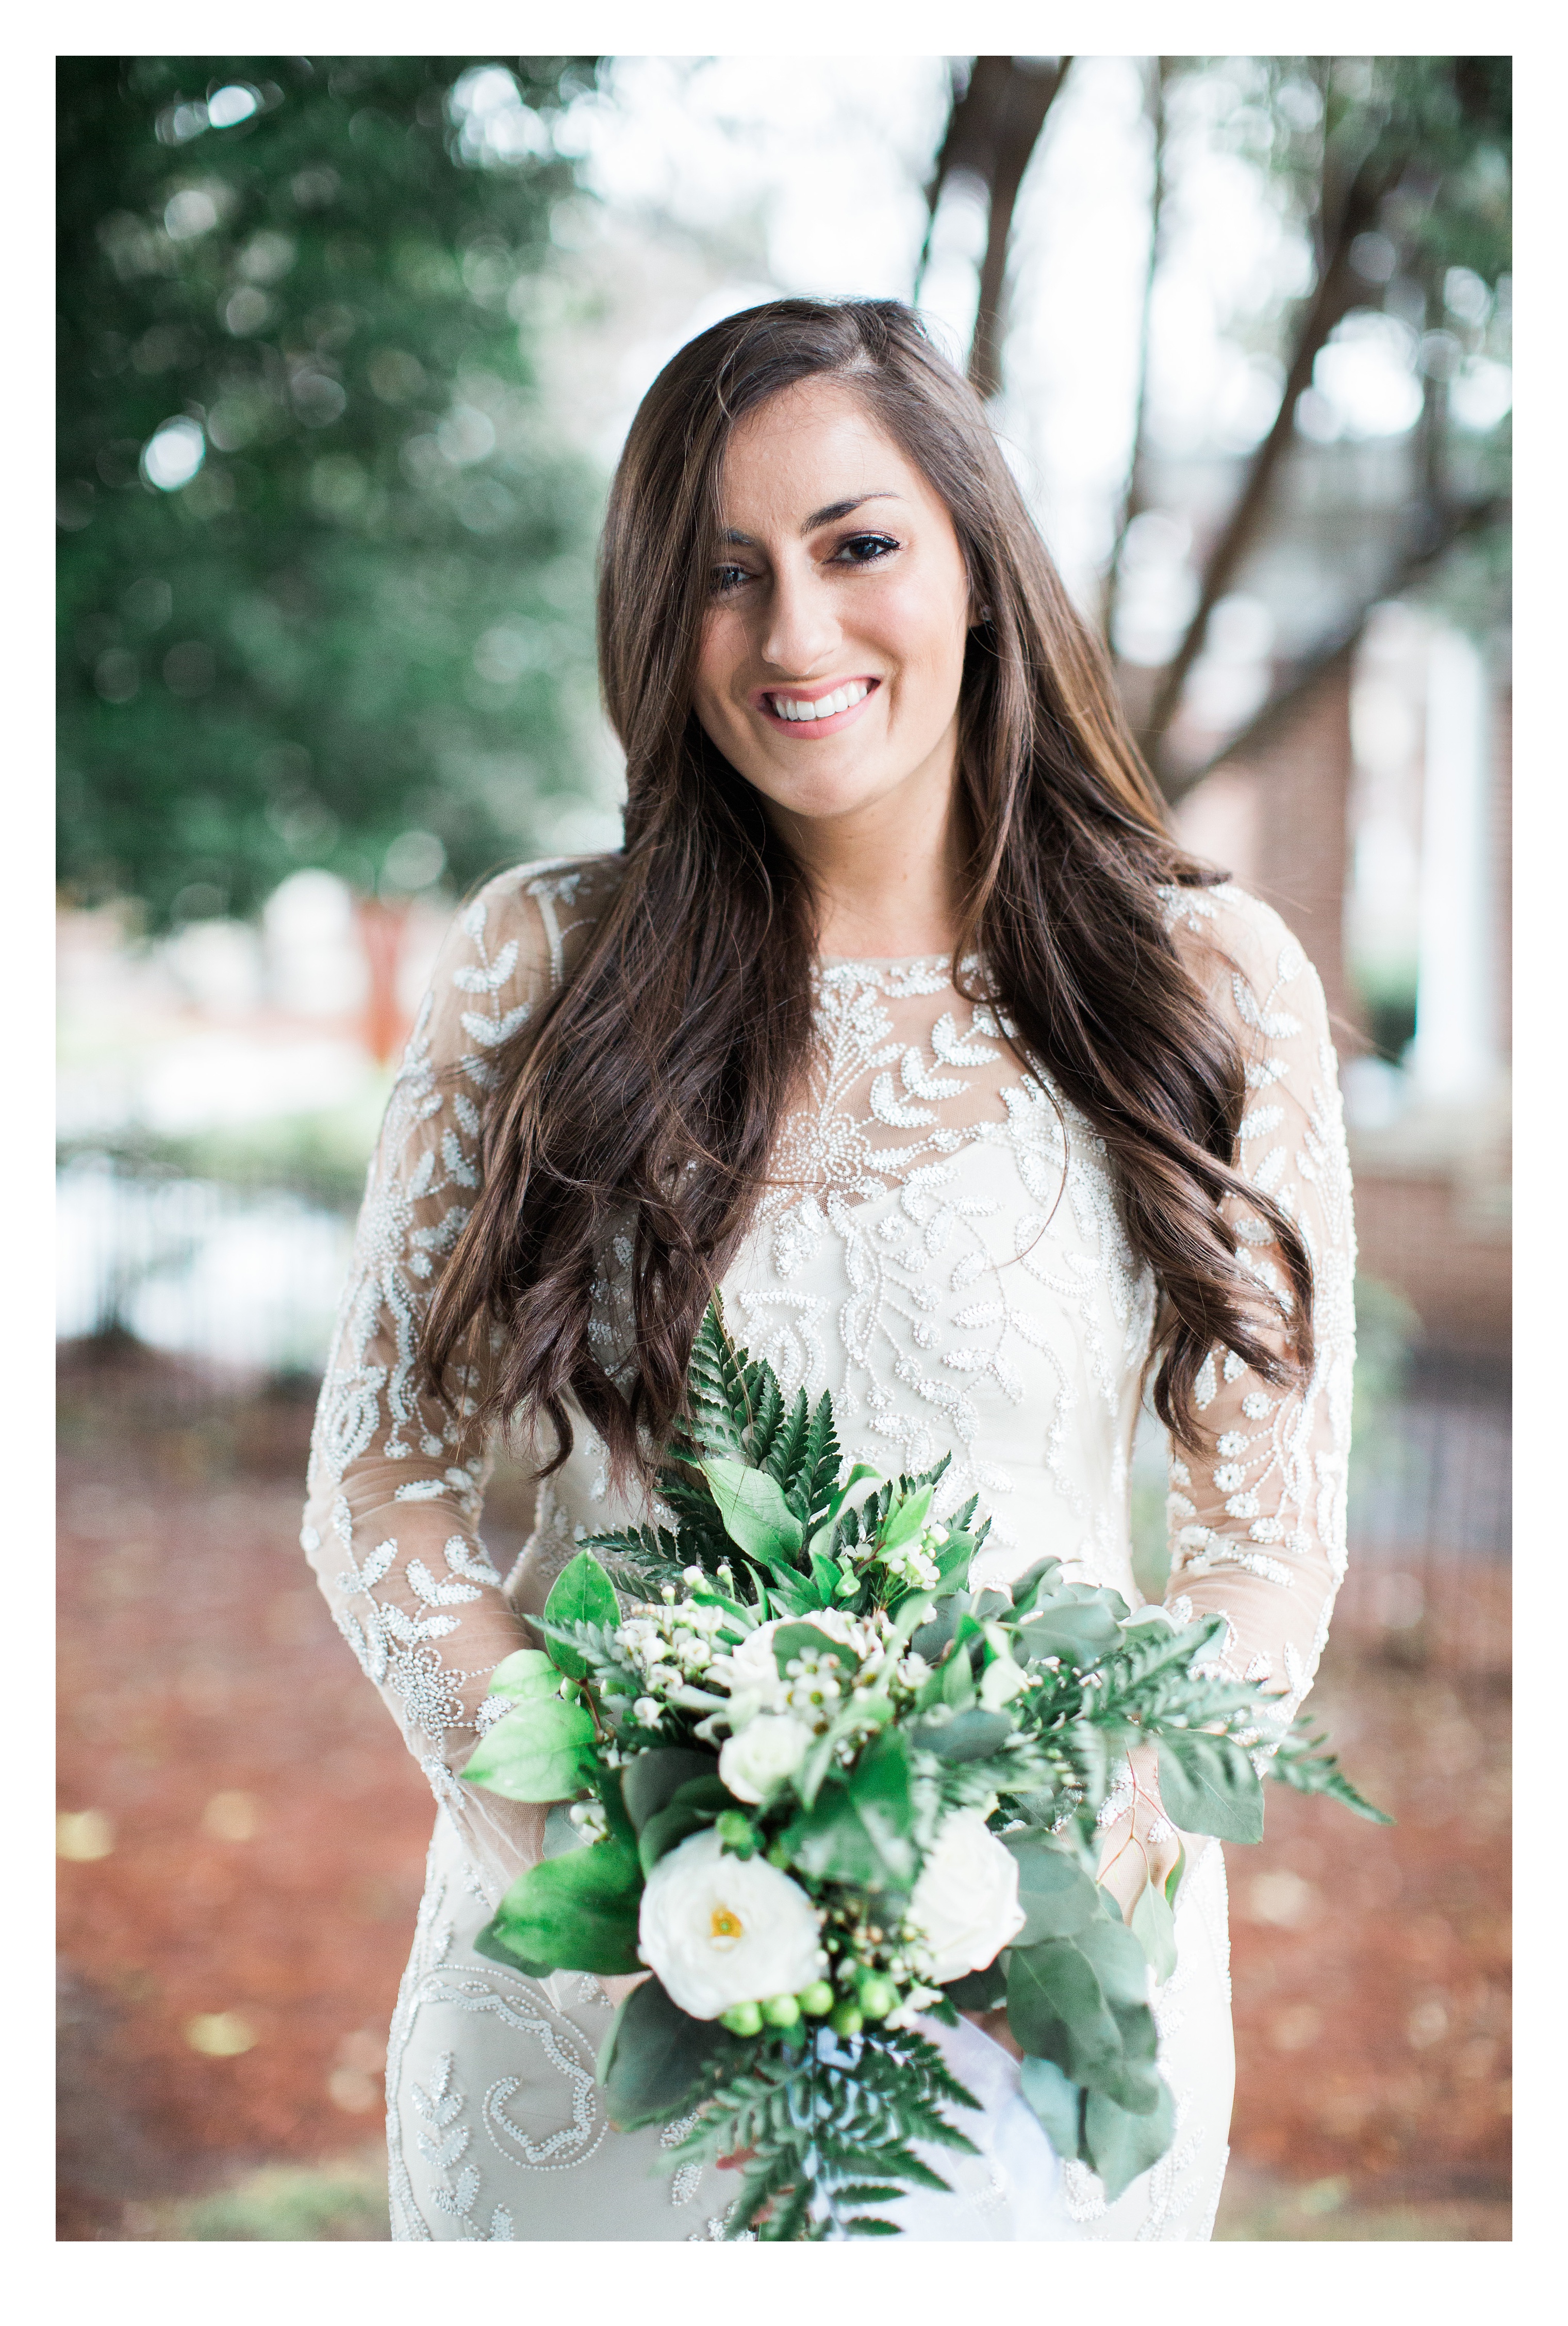 Bride Portrait with Flowers Outside